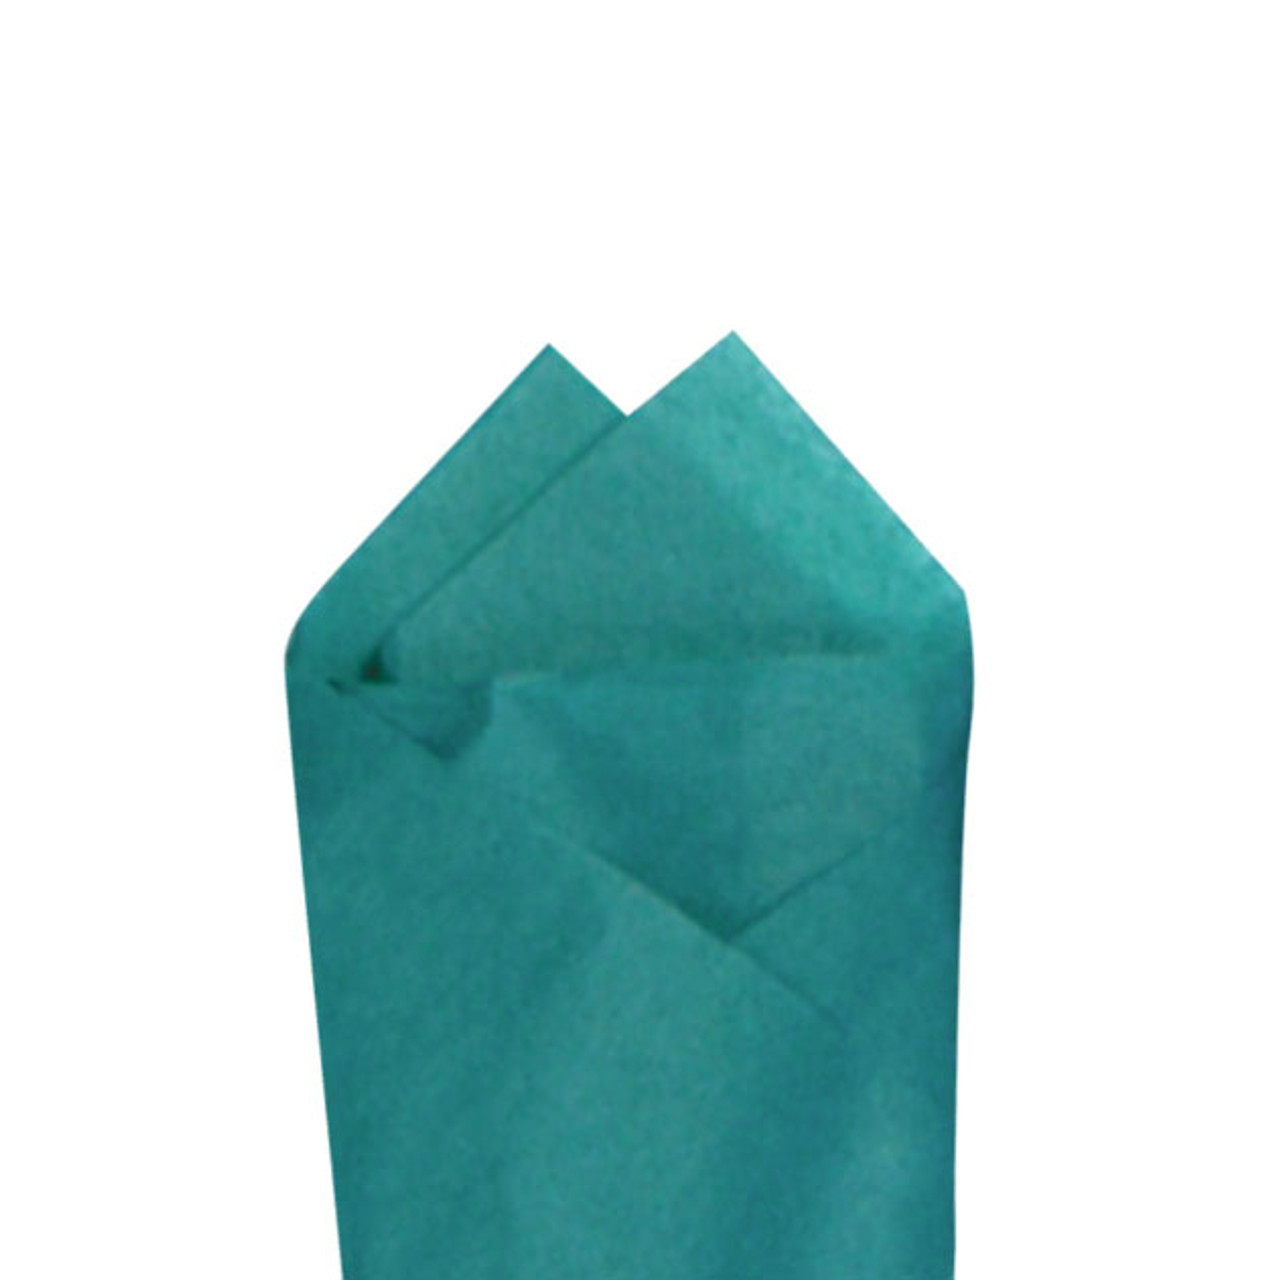 Apple Green SatinWrap Solid Color Tissue Paper - 20 x 30 - 480 Sheets per  Package